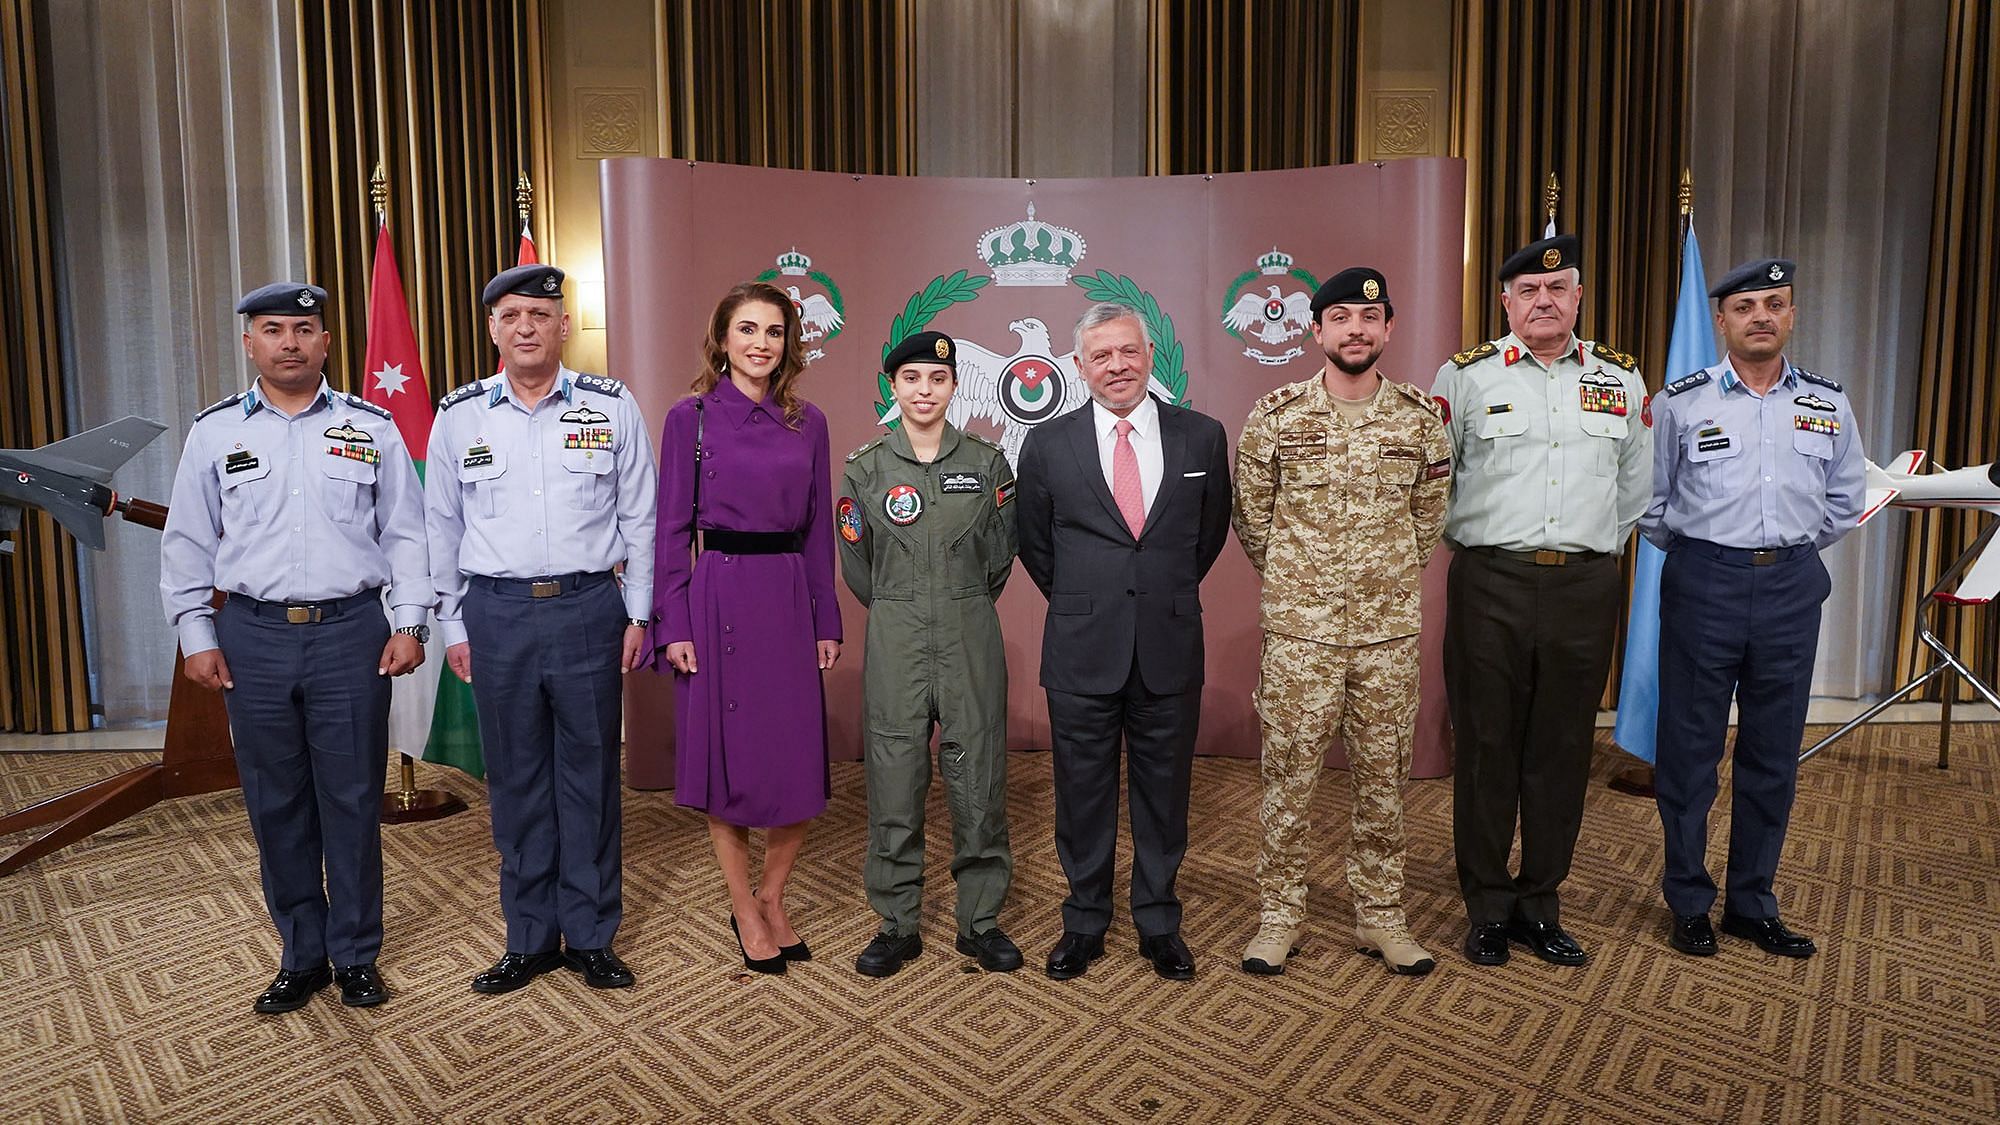 His Majesty King Abdullah II presents Princess Salma  with her wings at a ceremony.